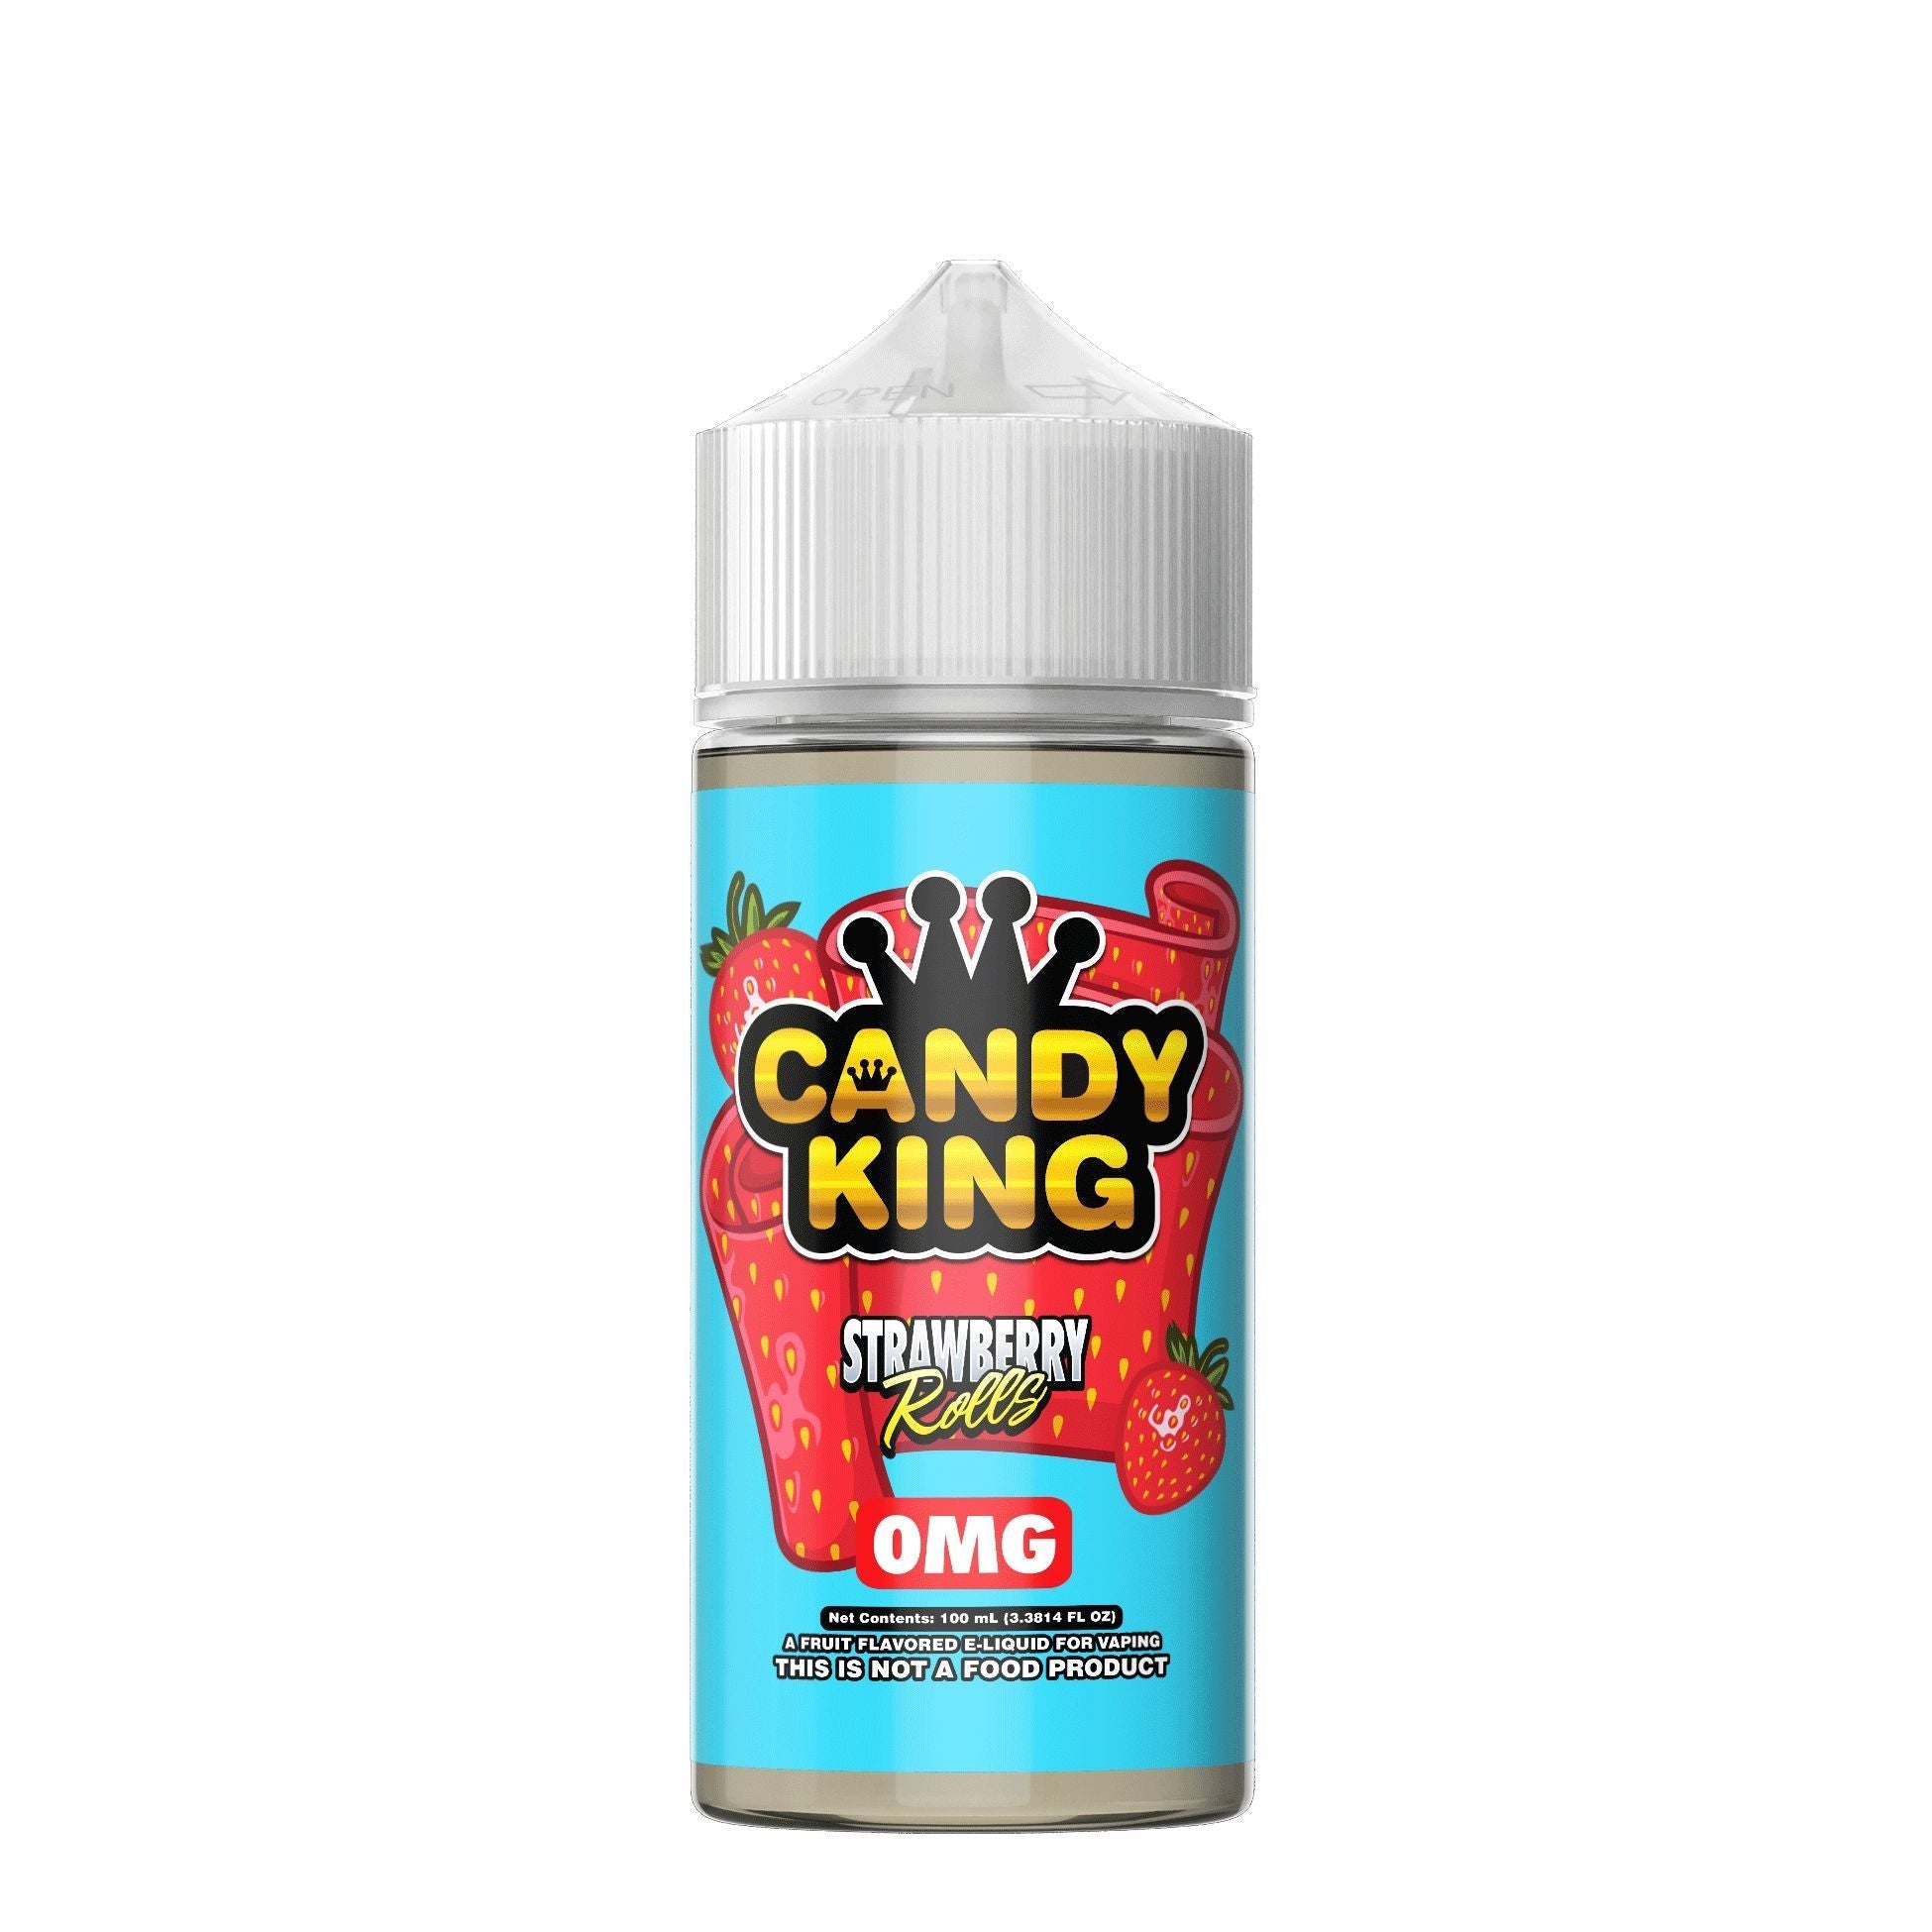 Buy Strawberry Rolls By Candy King - Wick And Wire Co Melbourne Vape Shop, Victoria Australia